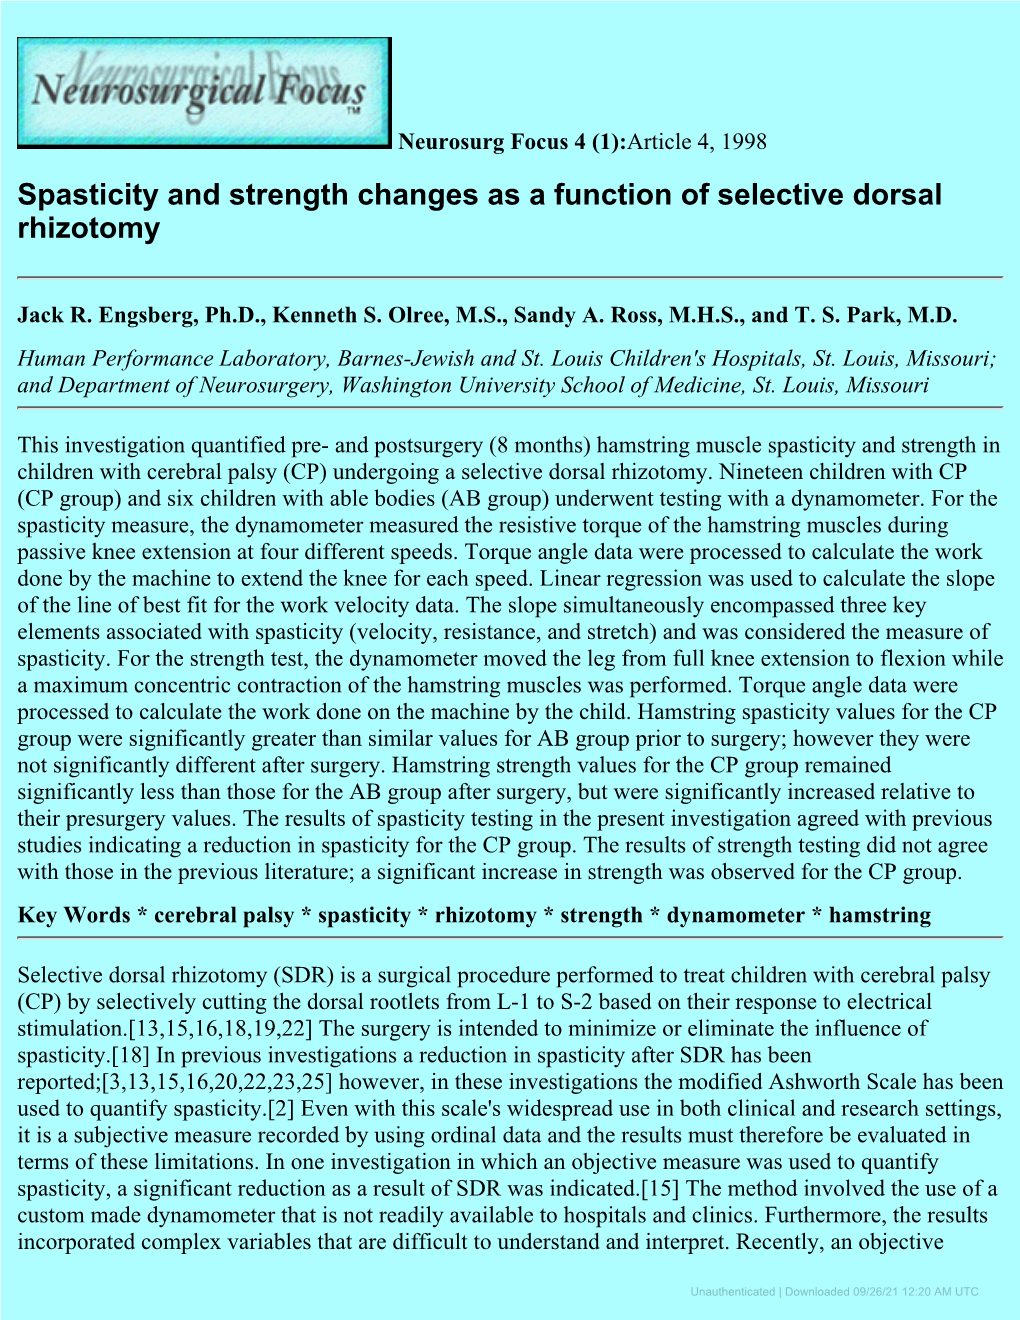 Spasticity and Strength Changes As a Function of Selective Dorsal Rhizotomy